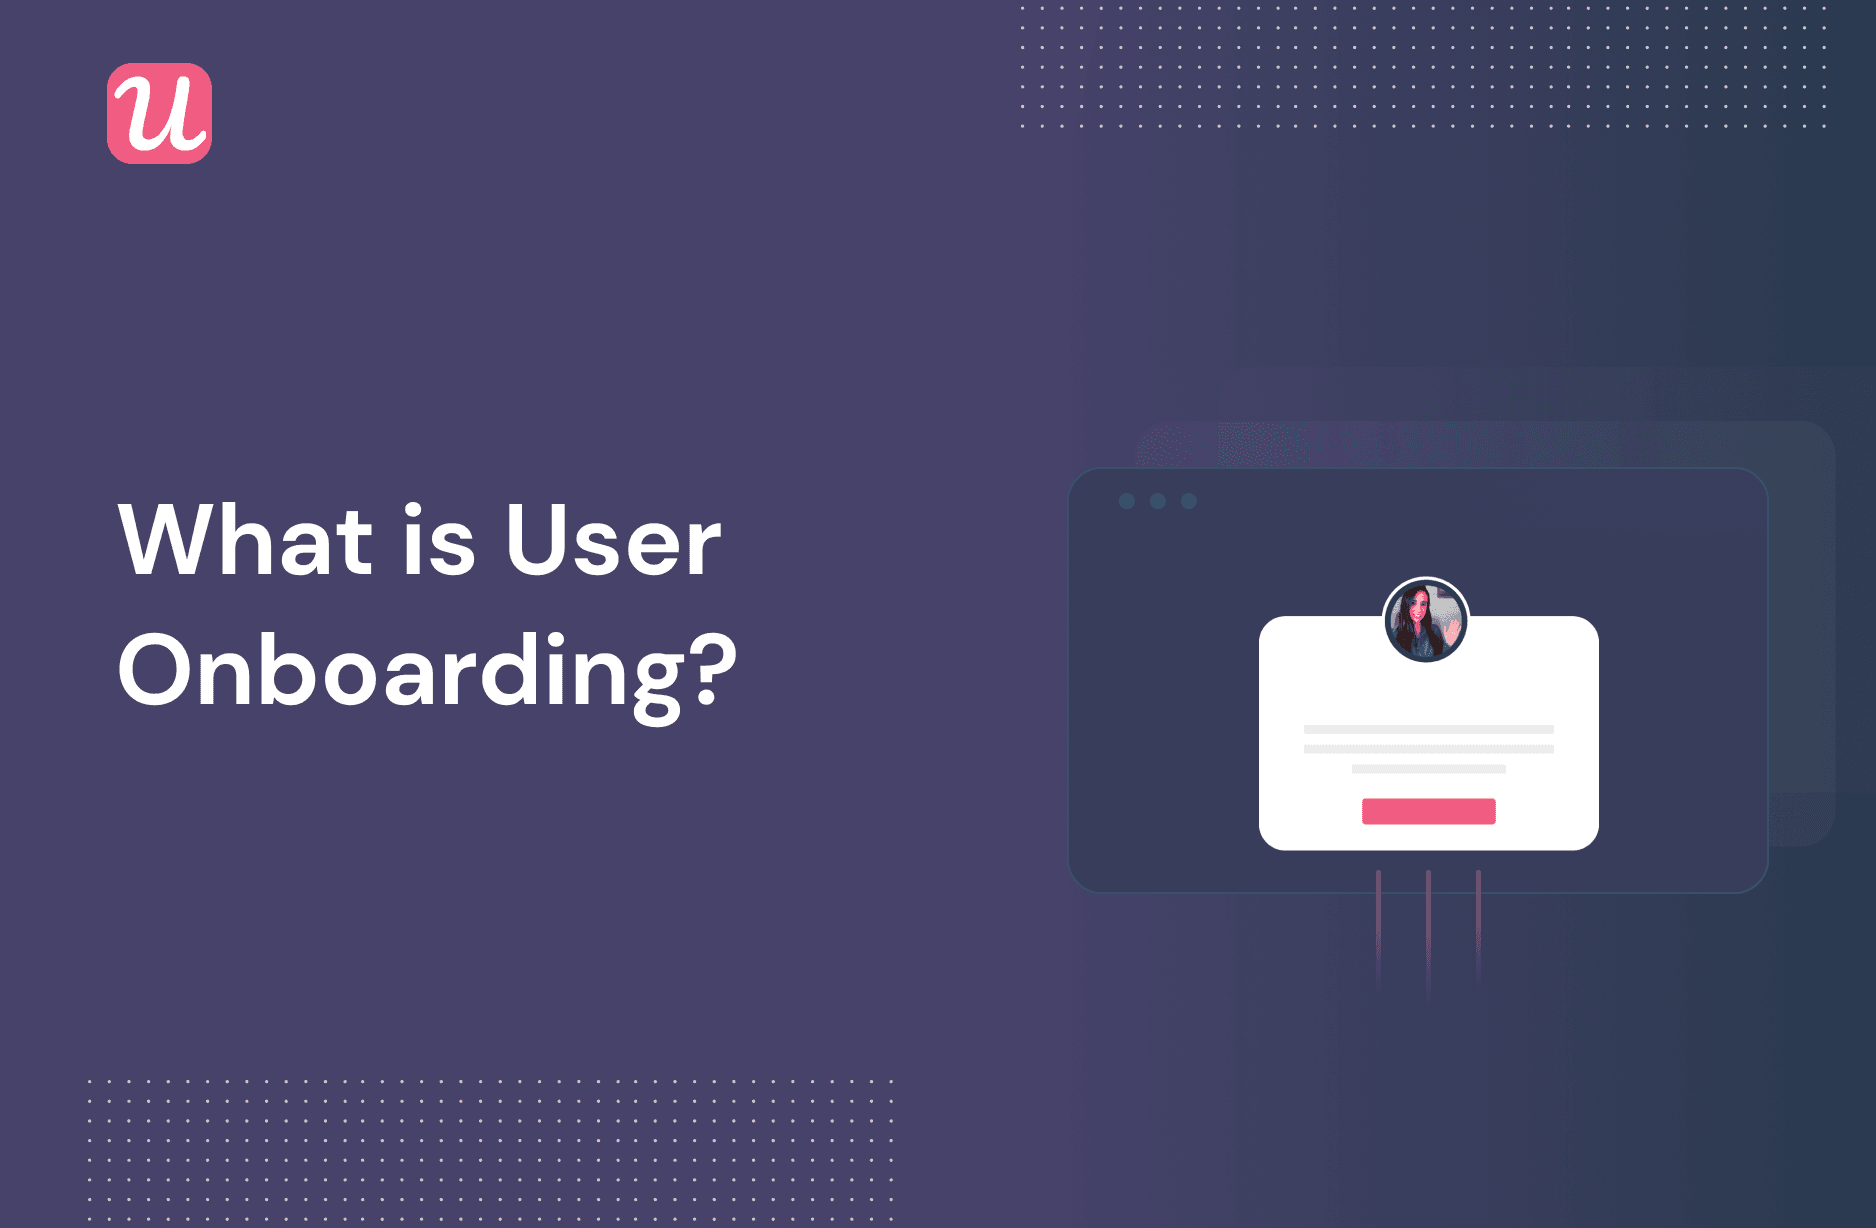 What is User Onboarding?